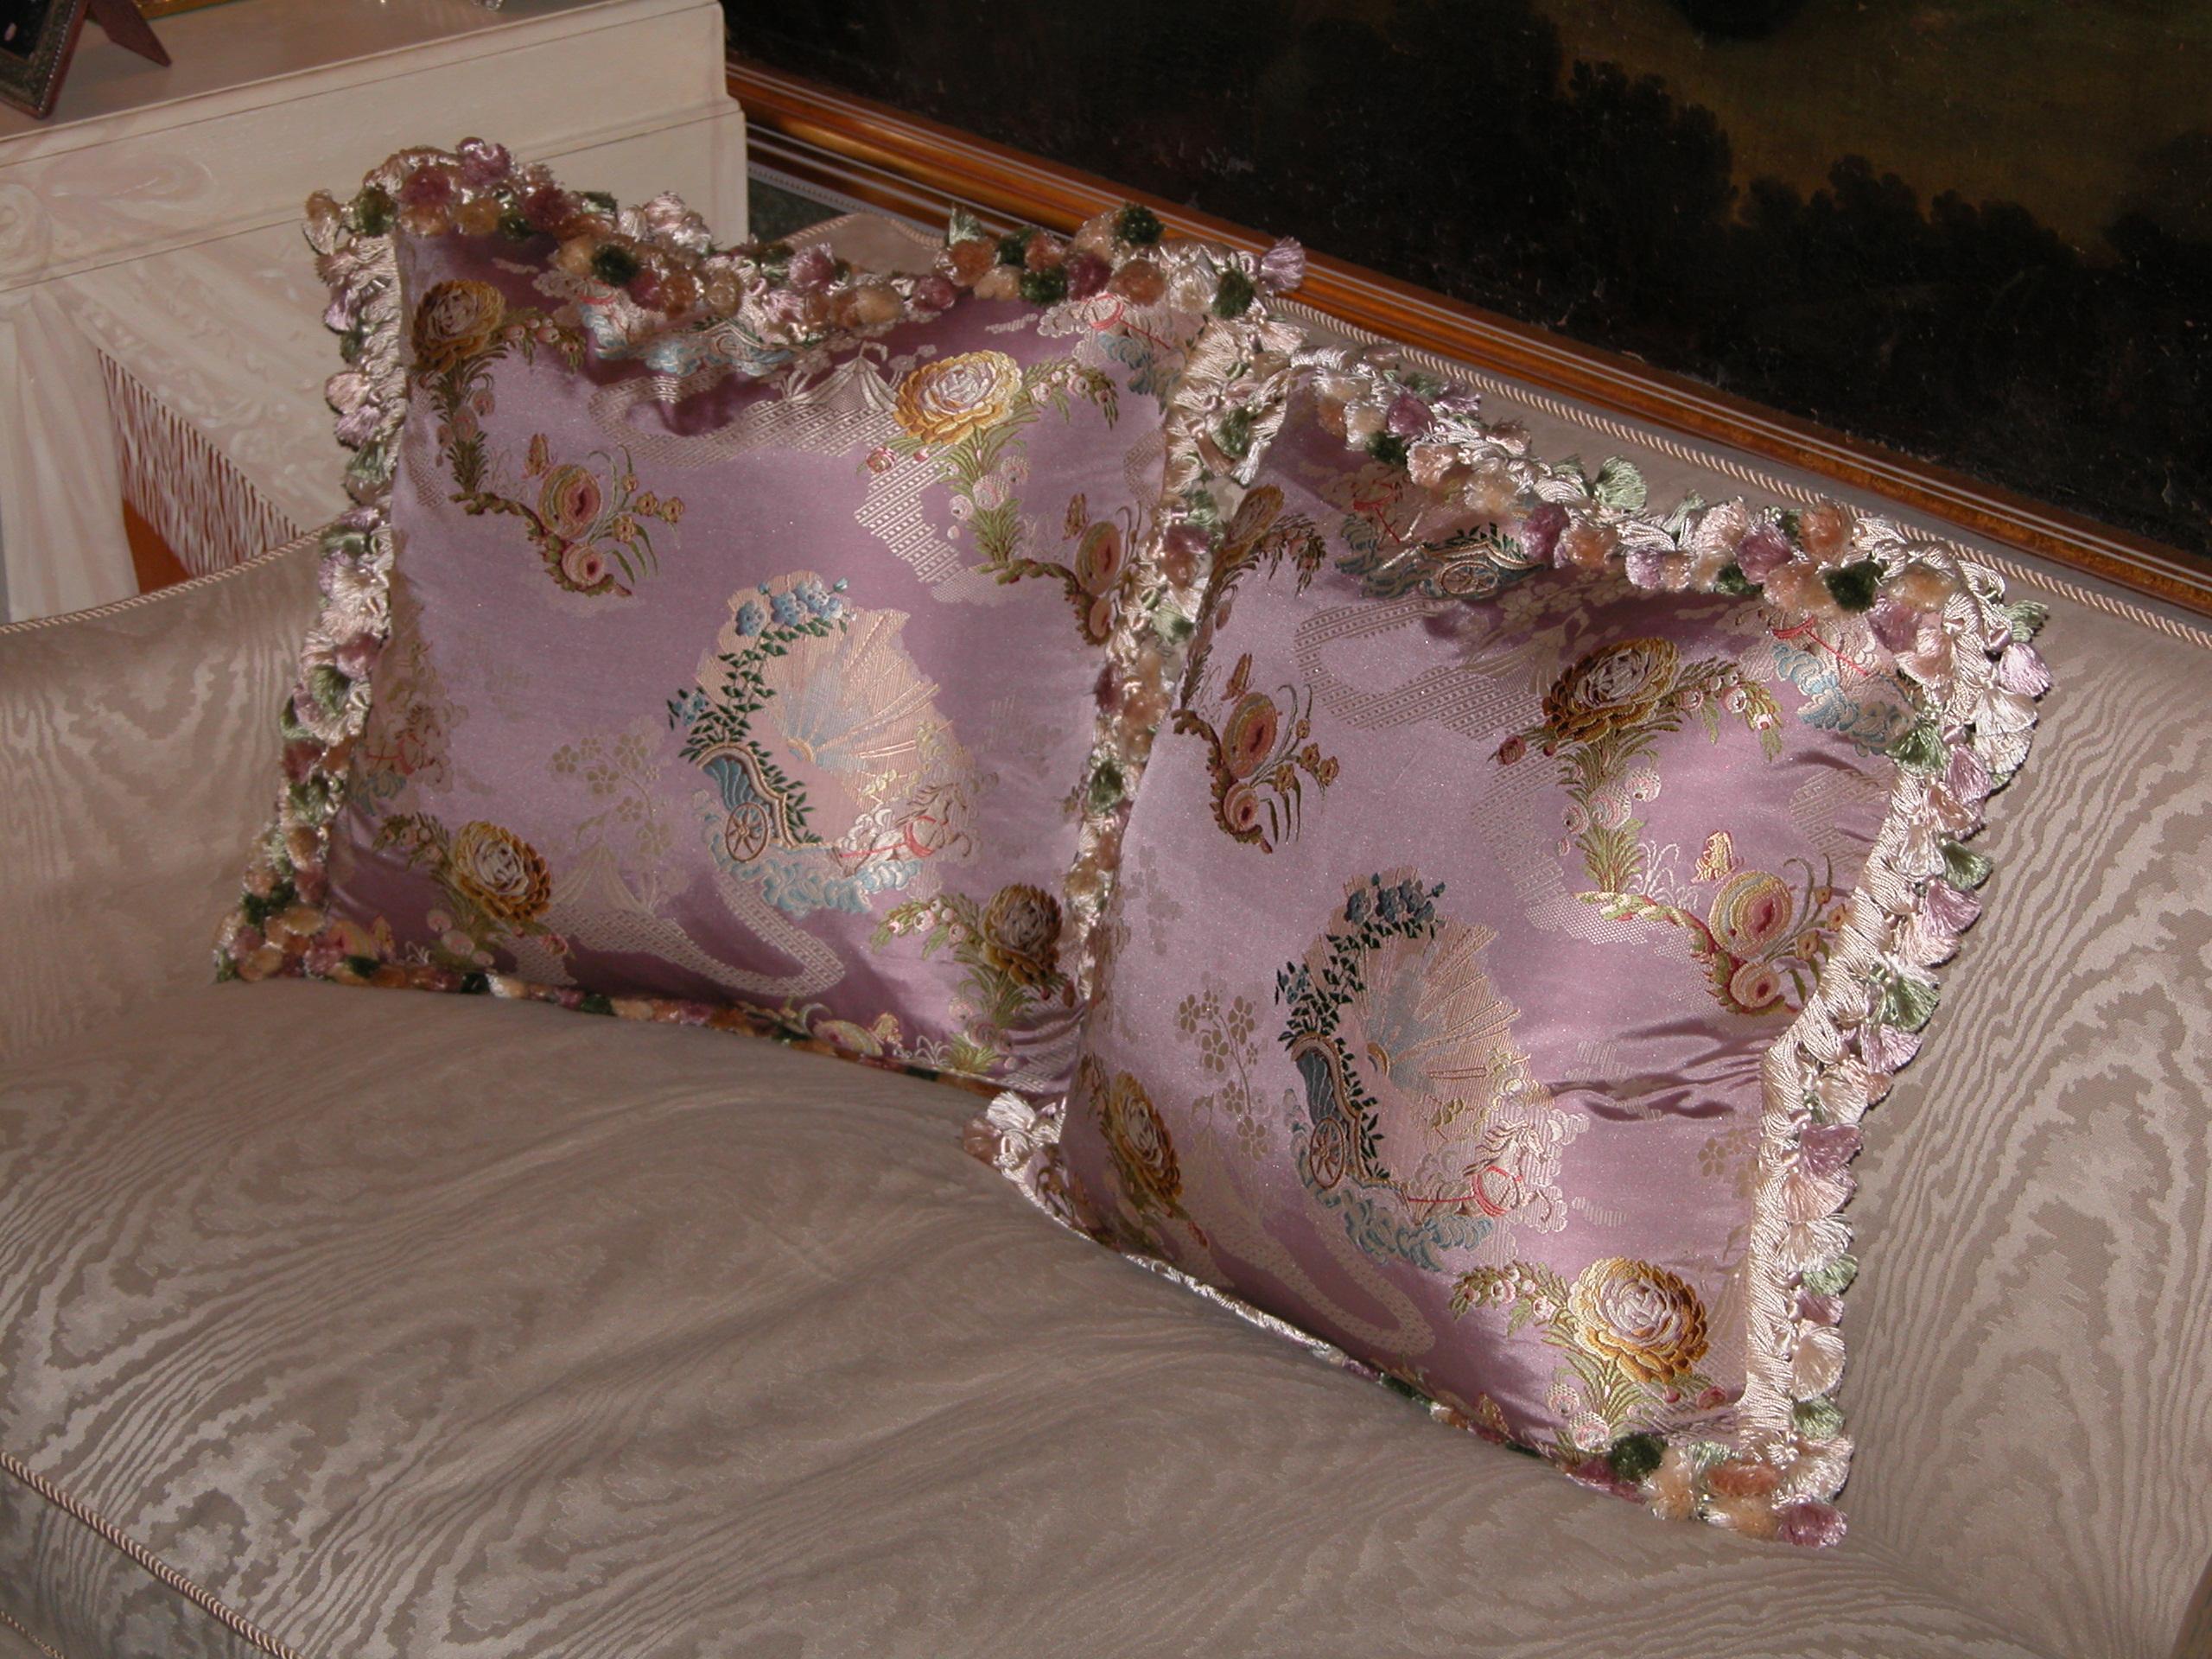 Pair of silk brocade pillows with silk tassel trim by Scalamandre, the fabric is from Old World Weavers, Inc. Just made into pillows with down inserts and zippers.